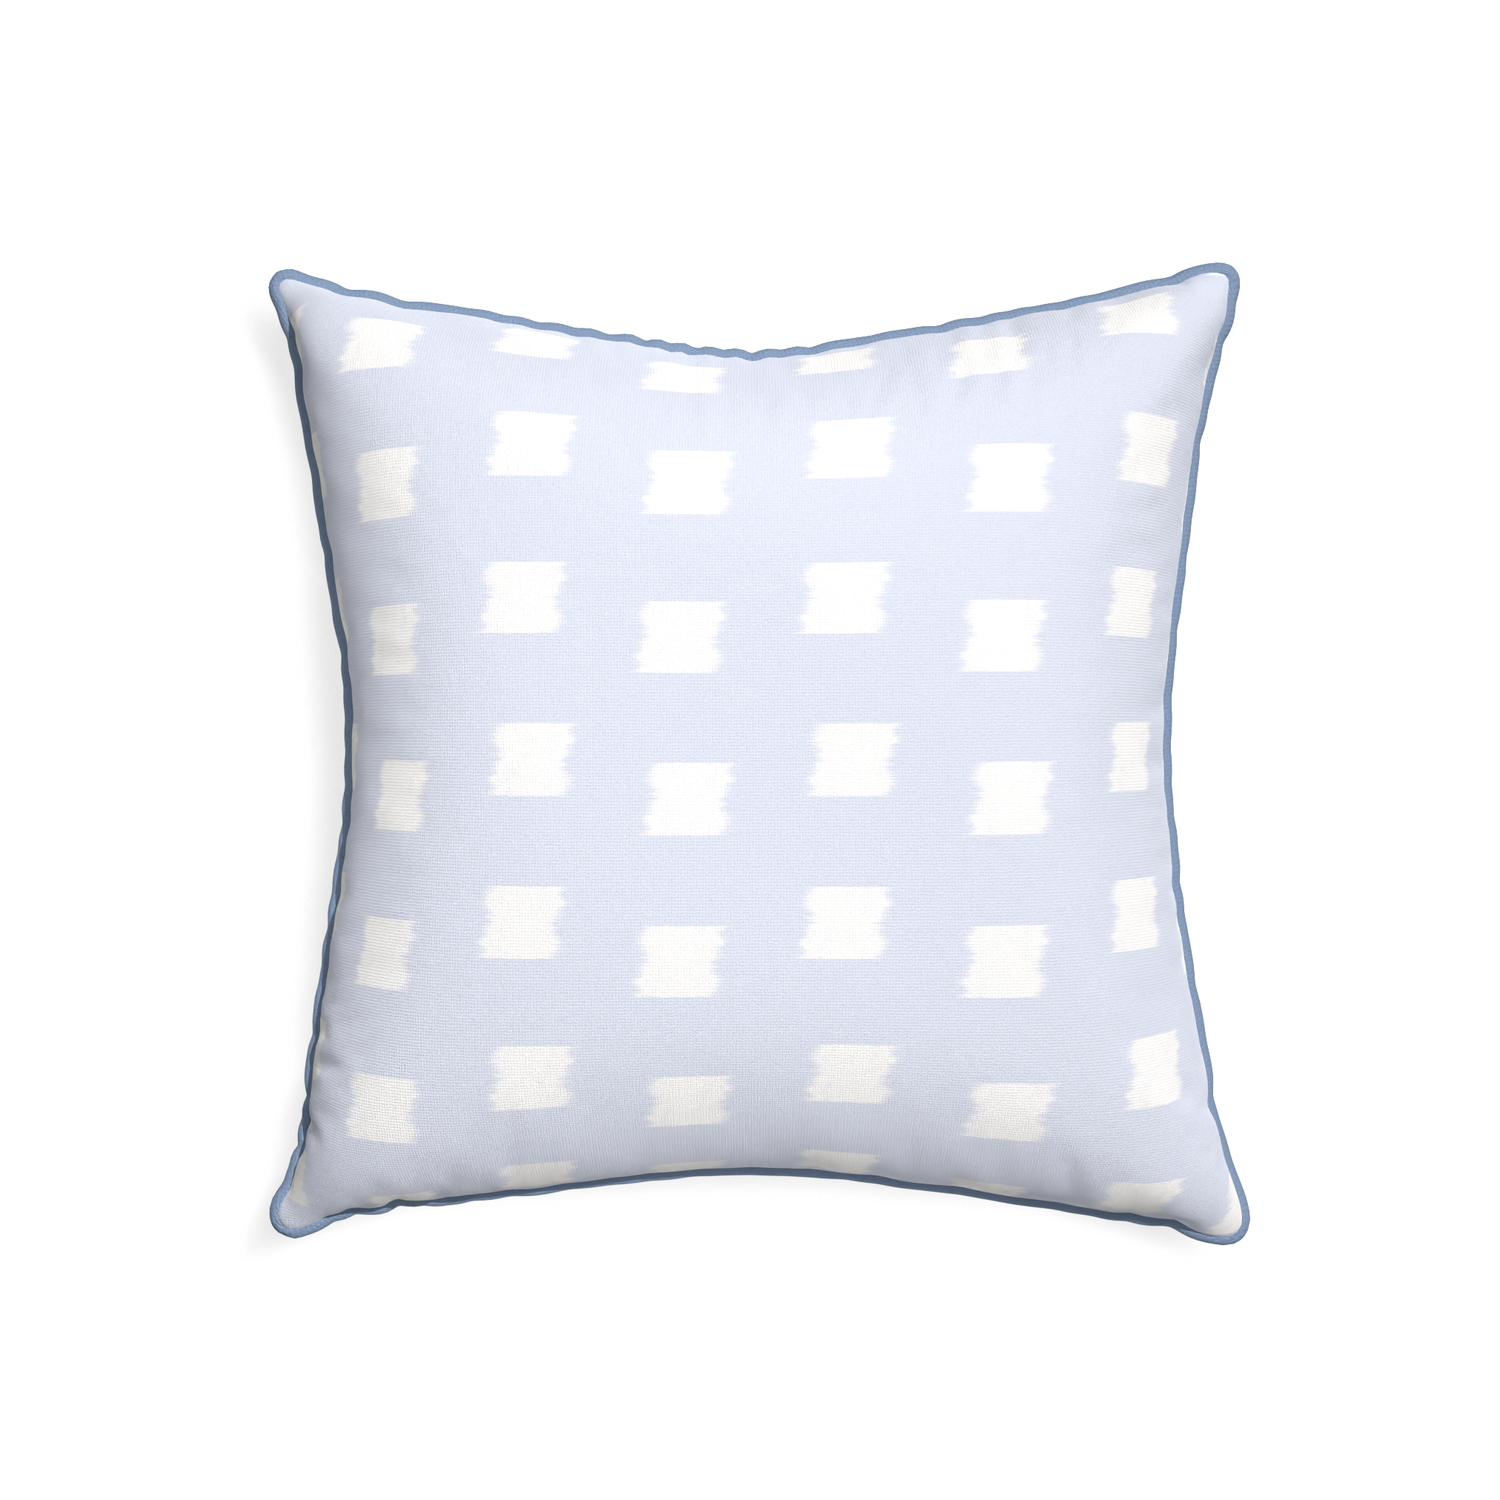 22-square denton custom sky blue patternpillow with sky piping on white background